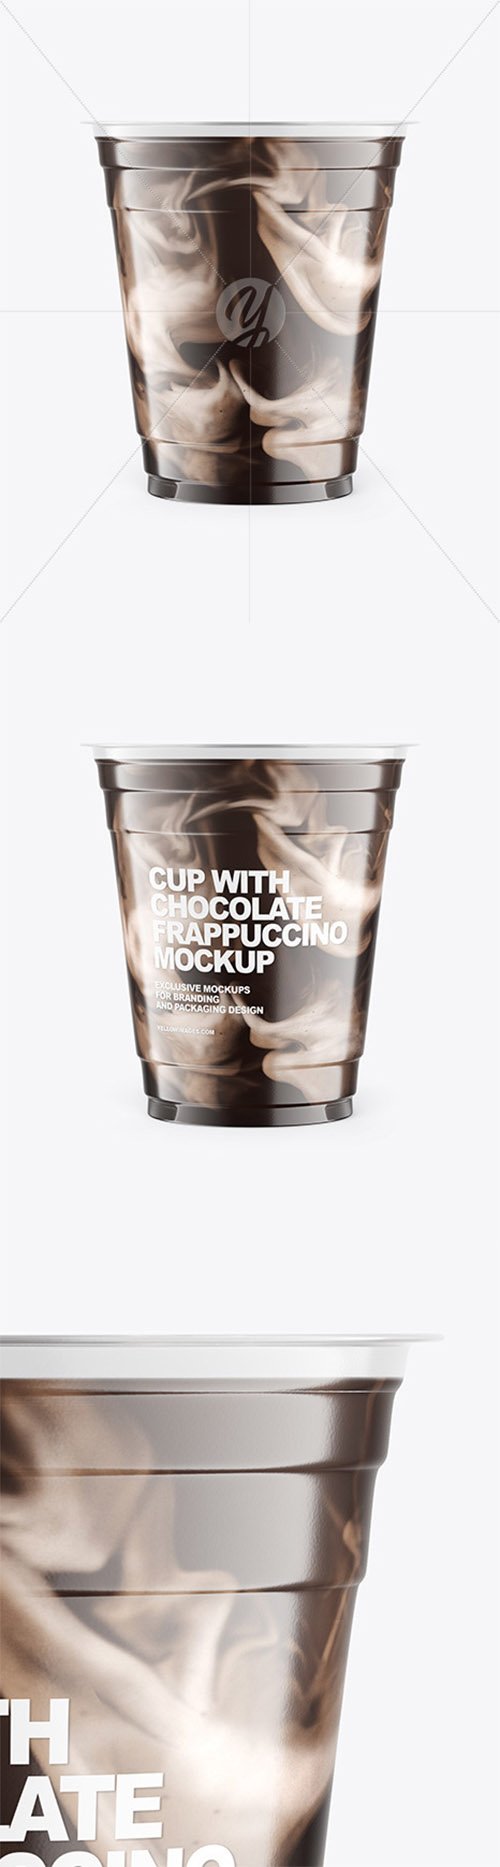 Cup With Chocolate Frappuccino Mockup 68302 TIF